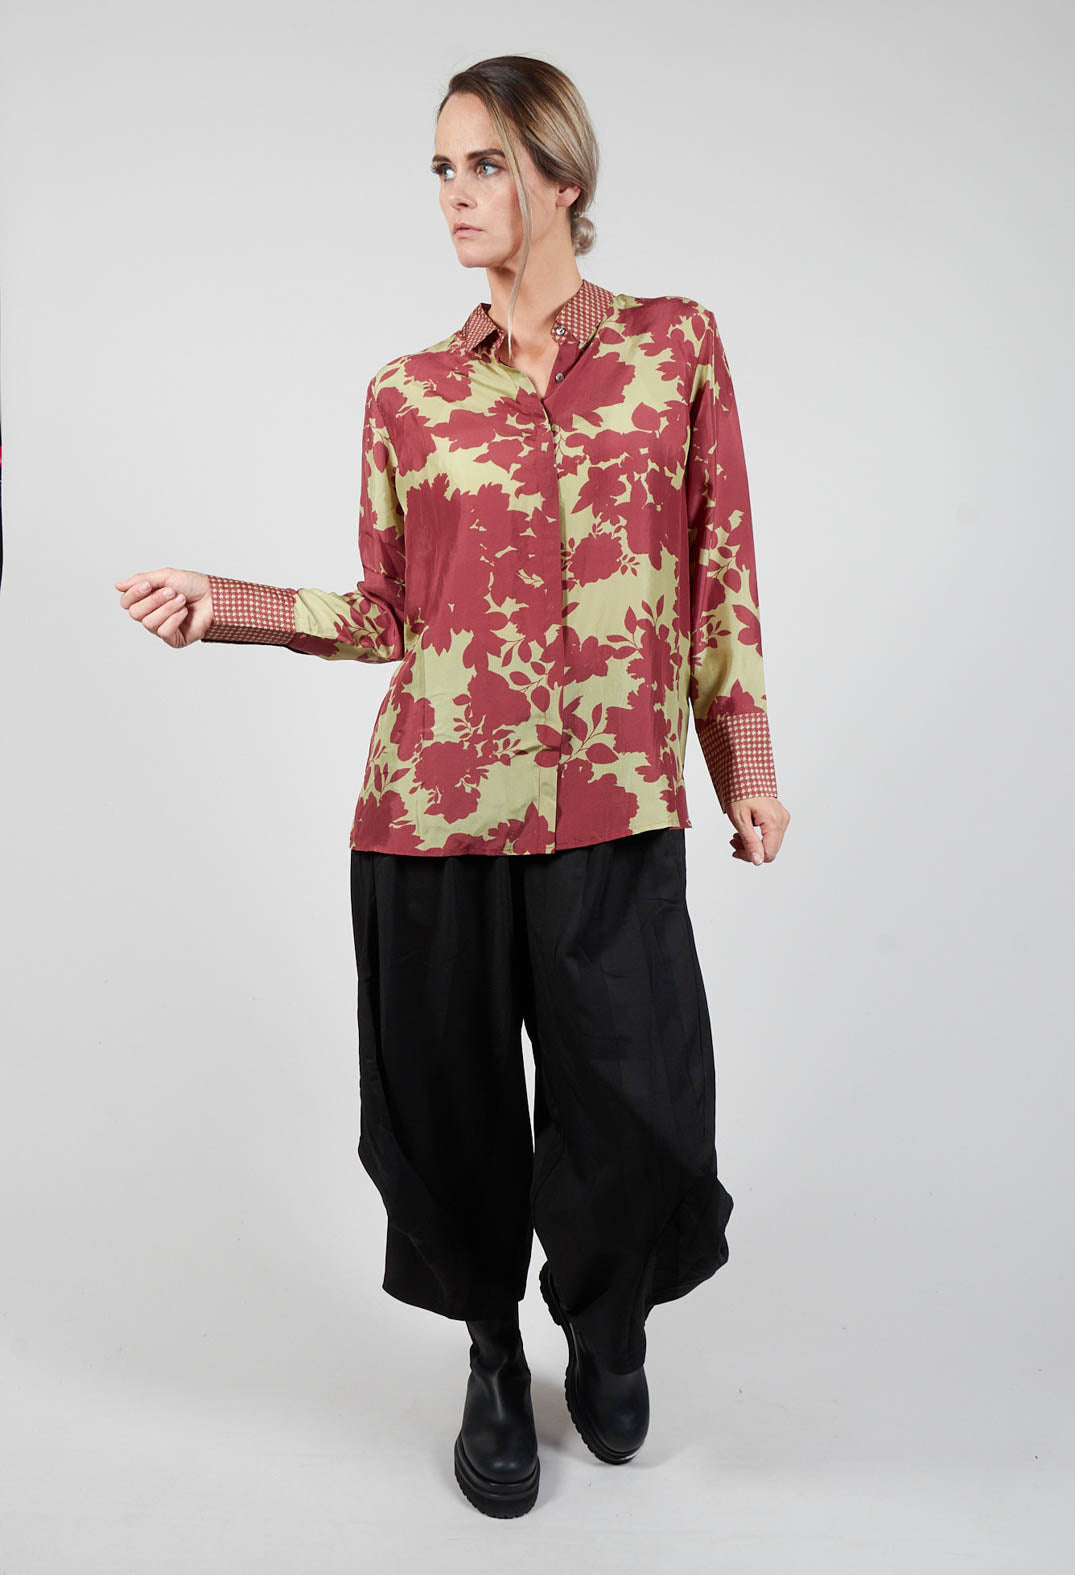 Simple Silk Shirt in Weeping Willow